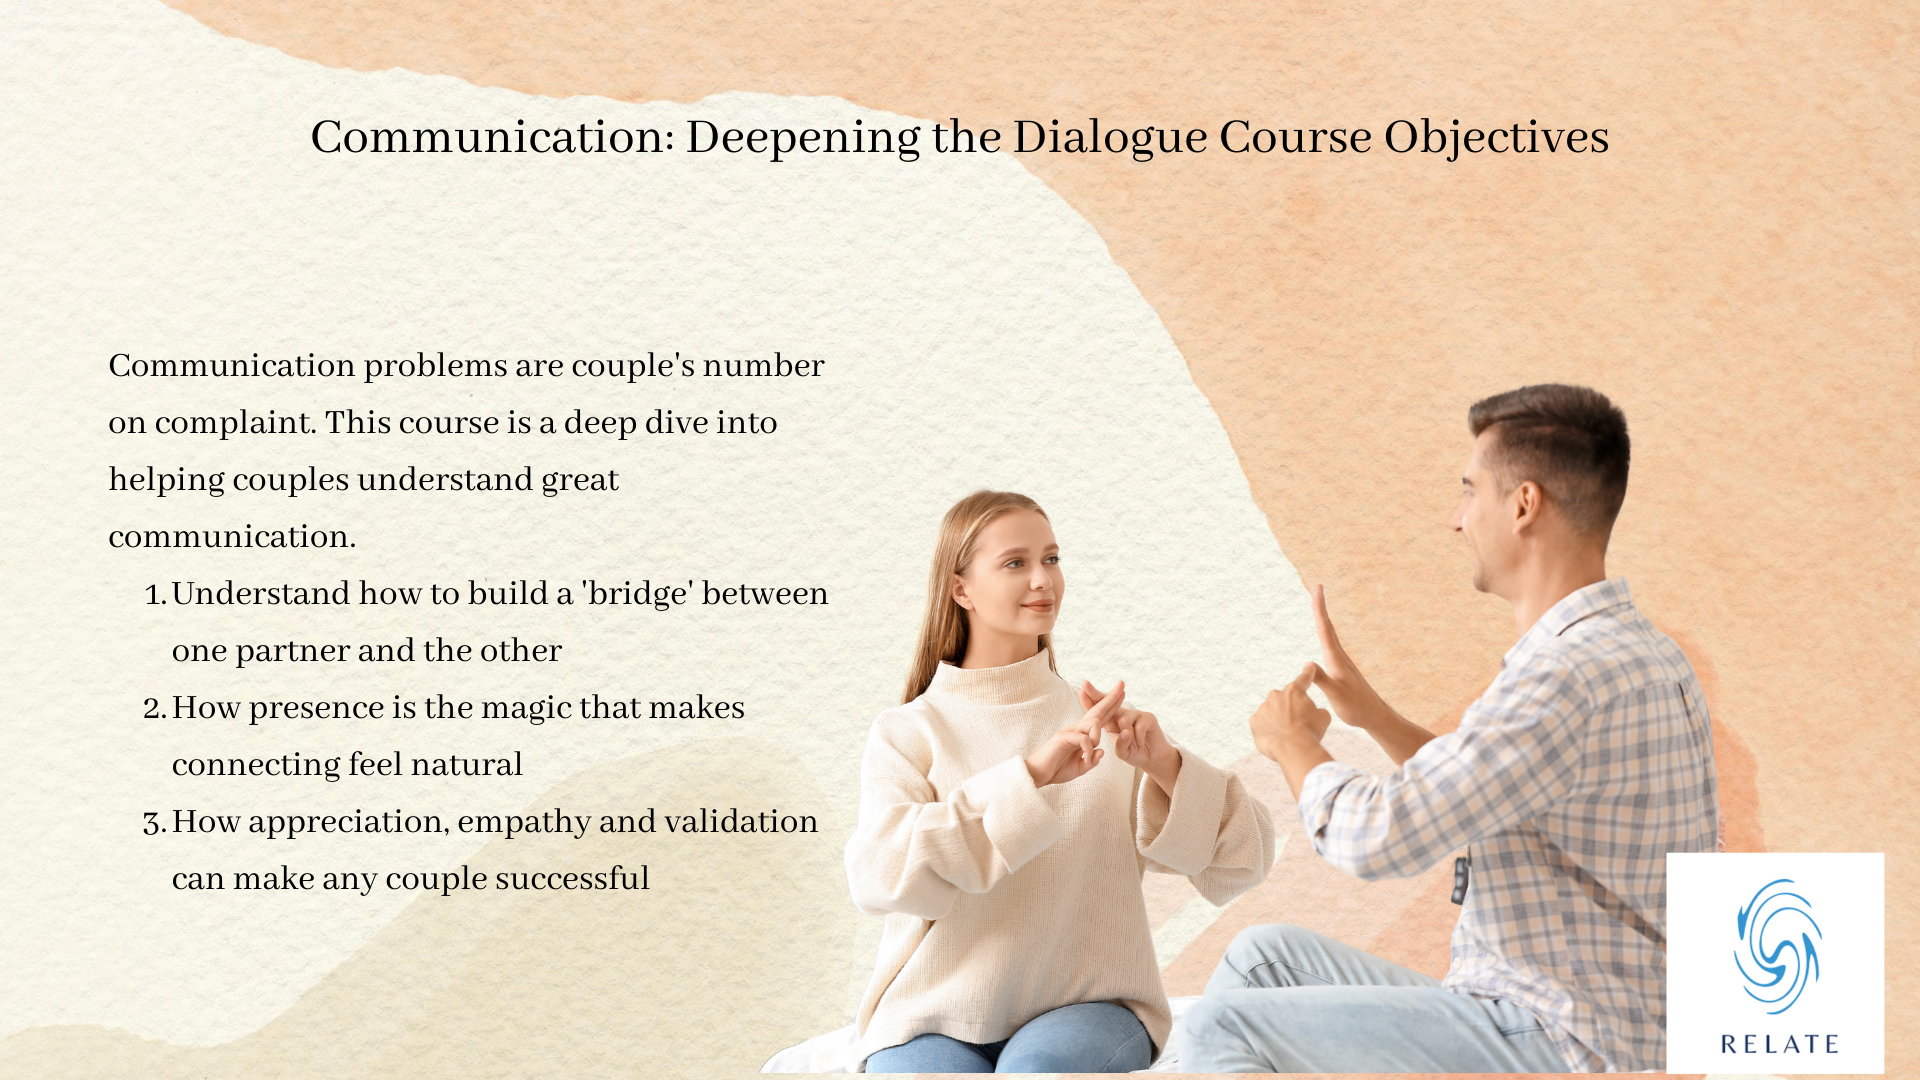 Communication - Deepening the Dialogue